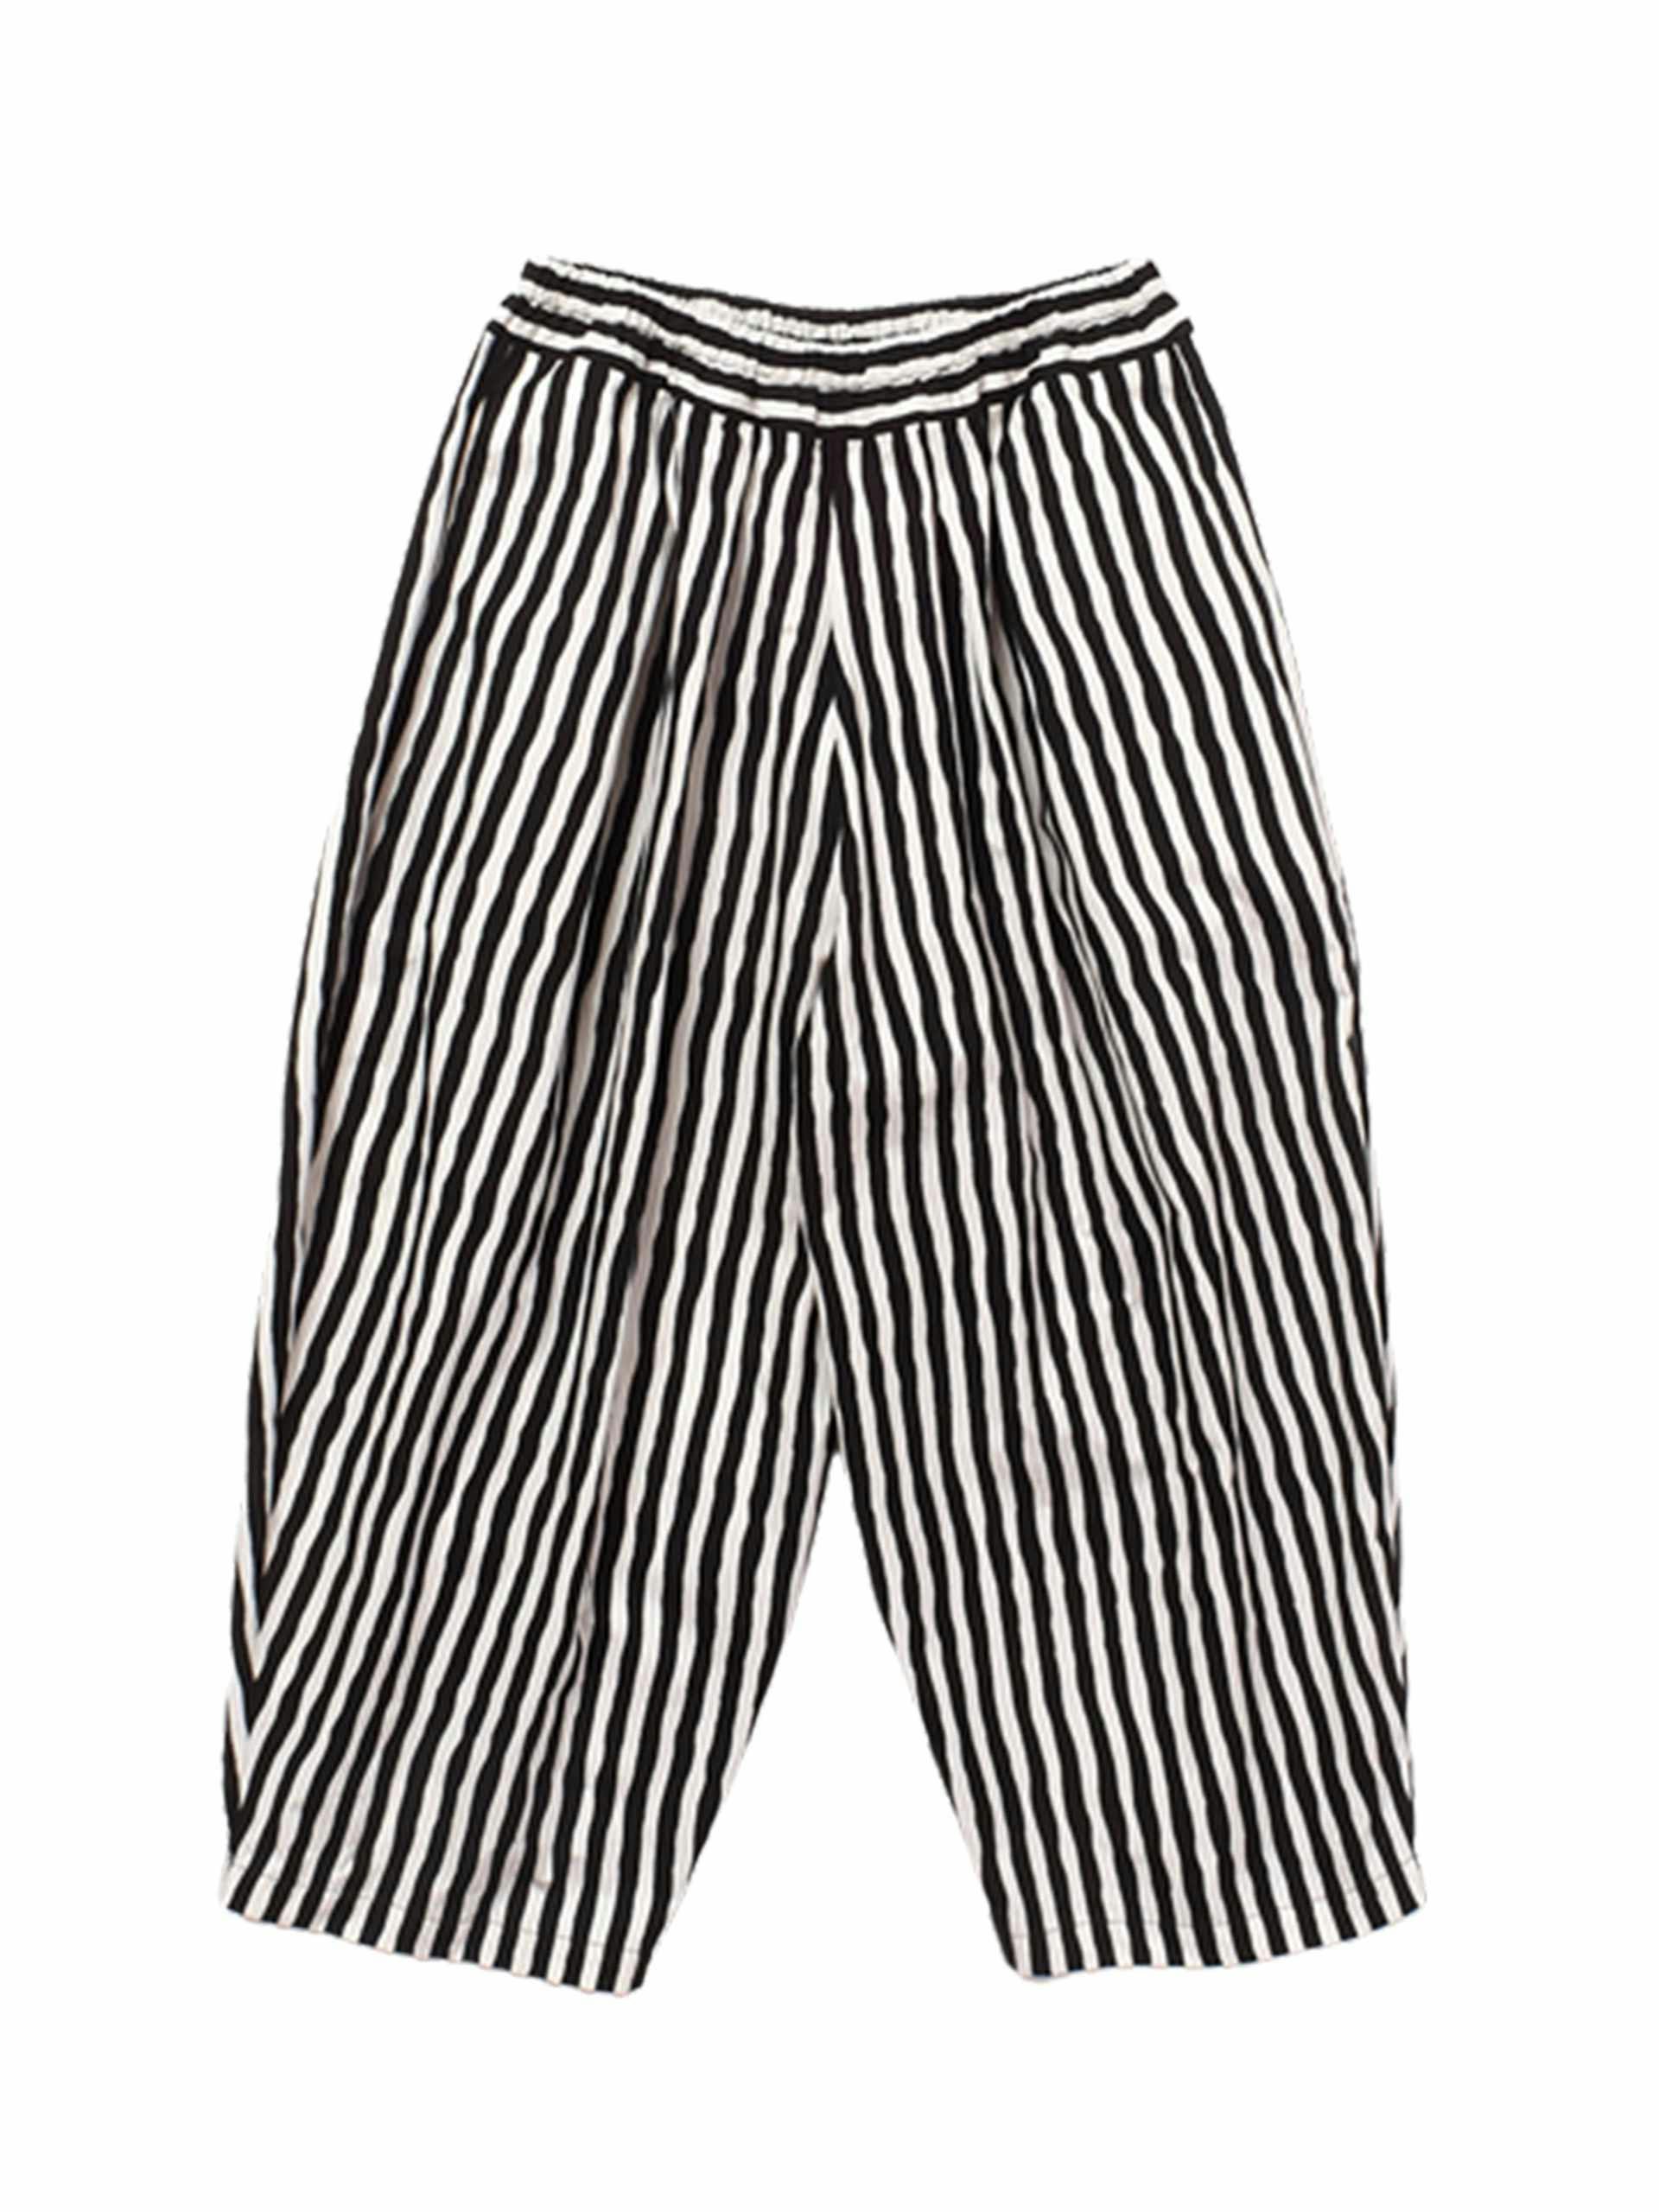 Striped baggy shorts